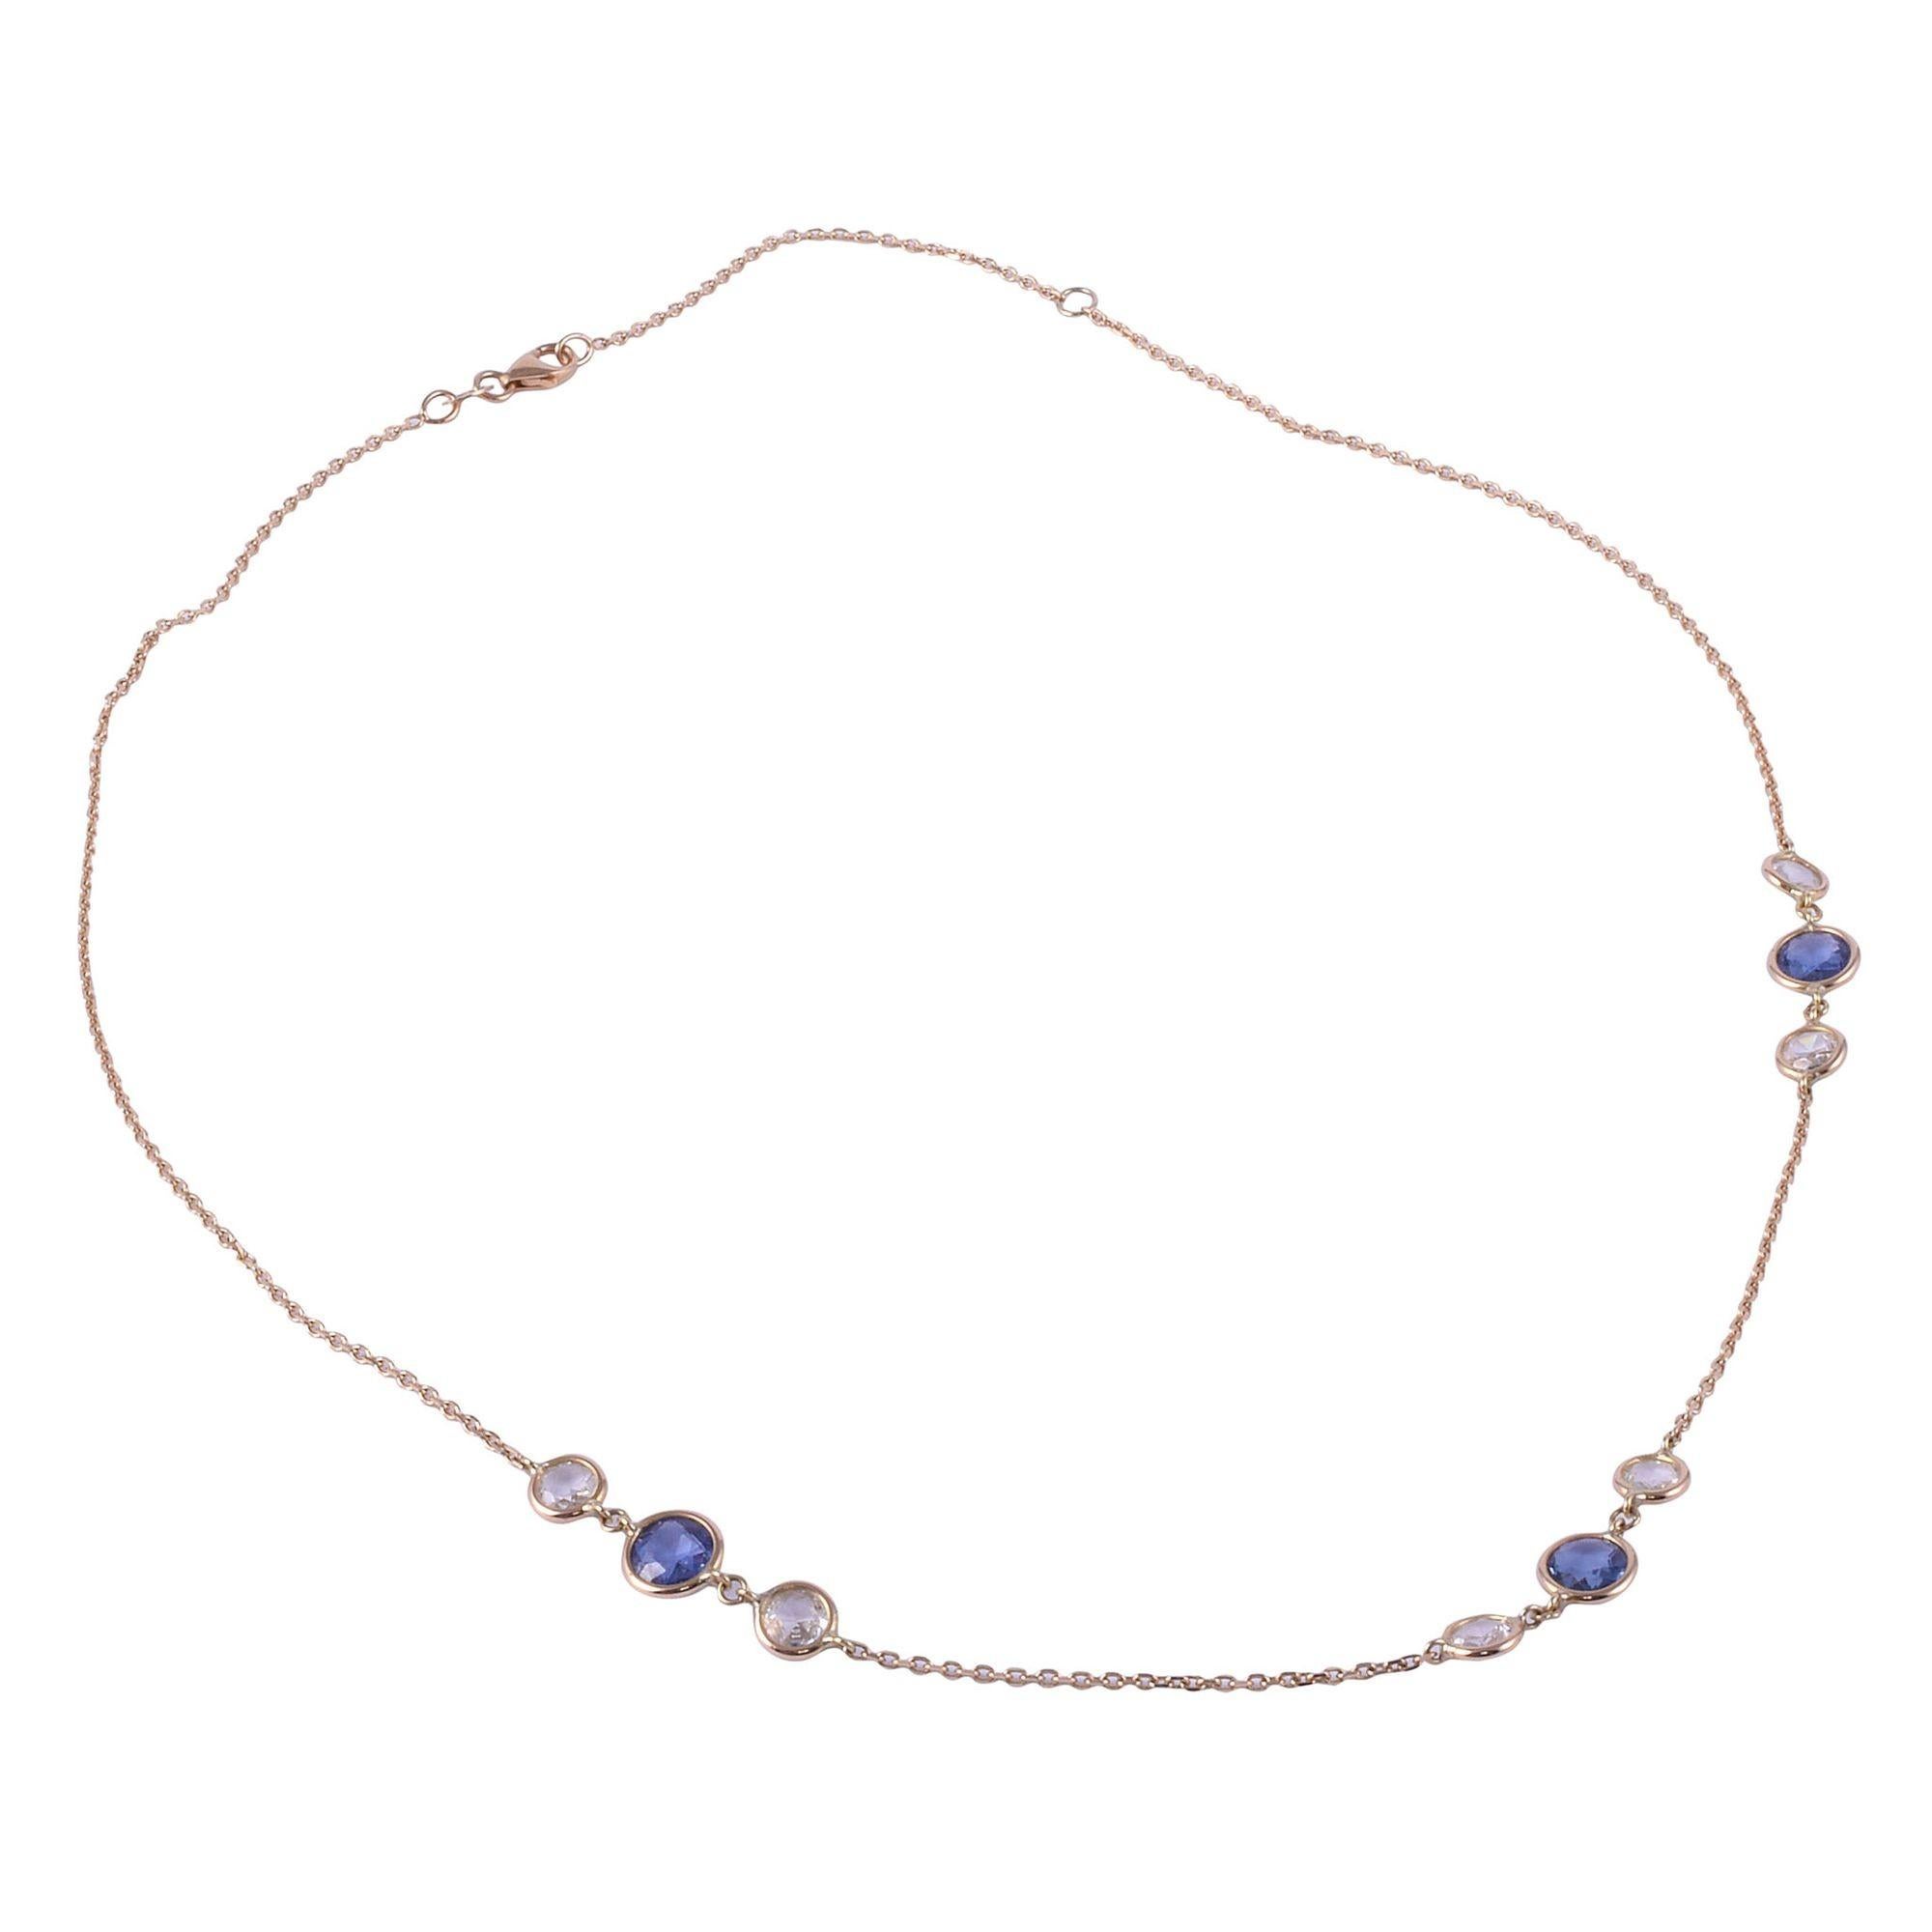 Estate Italian blue & white sapphire 18K necklace. This estate necklace is crafted in 18 karat yellow gold featuring bezel set blue sapphires at 3.0 carat total weight and another 3.0 carat total weight of bezel set white sapphires. [KIMH